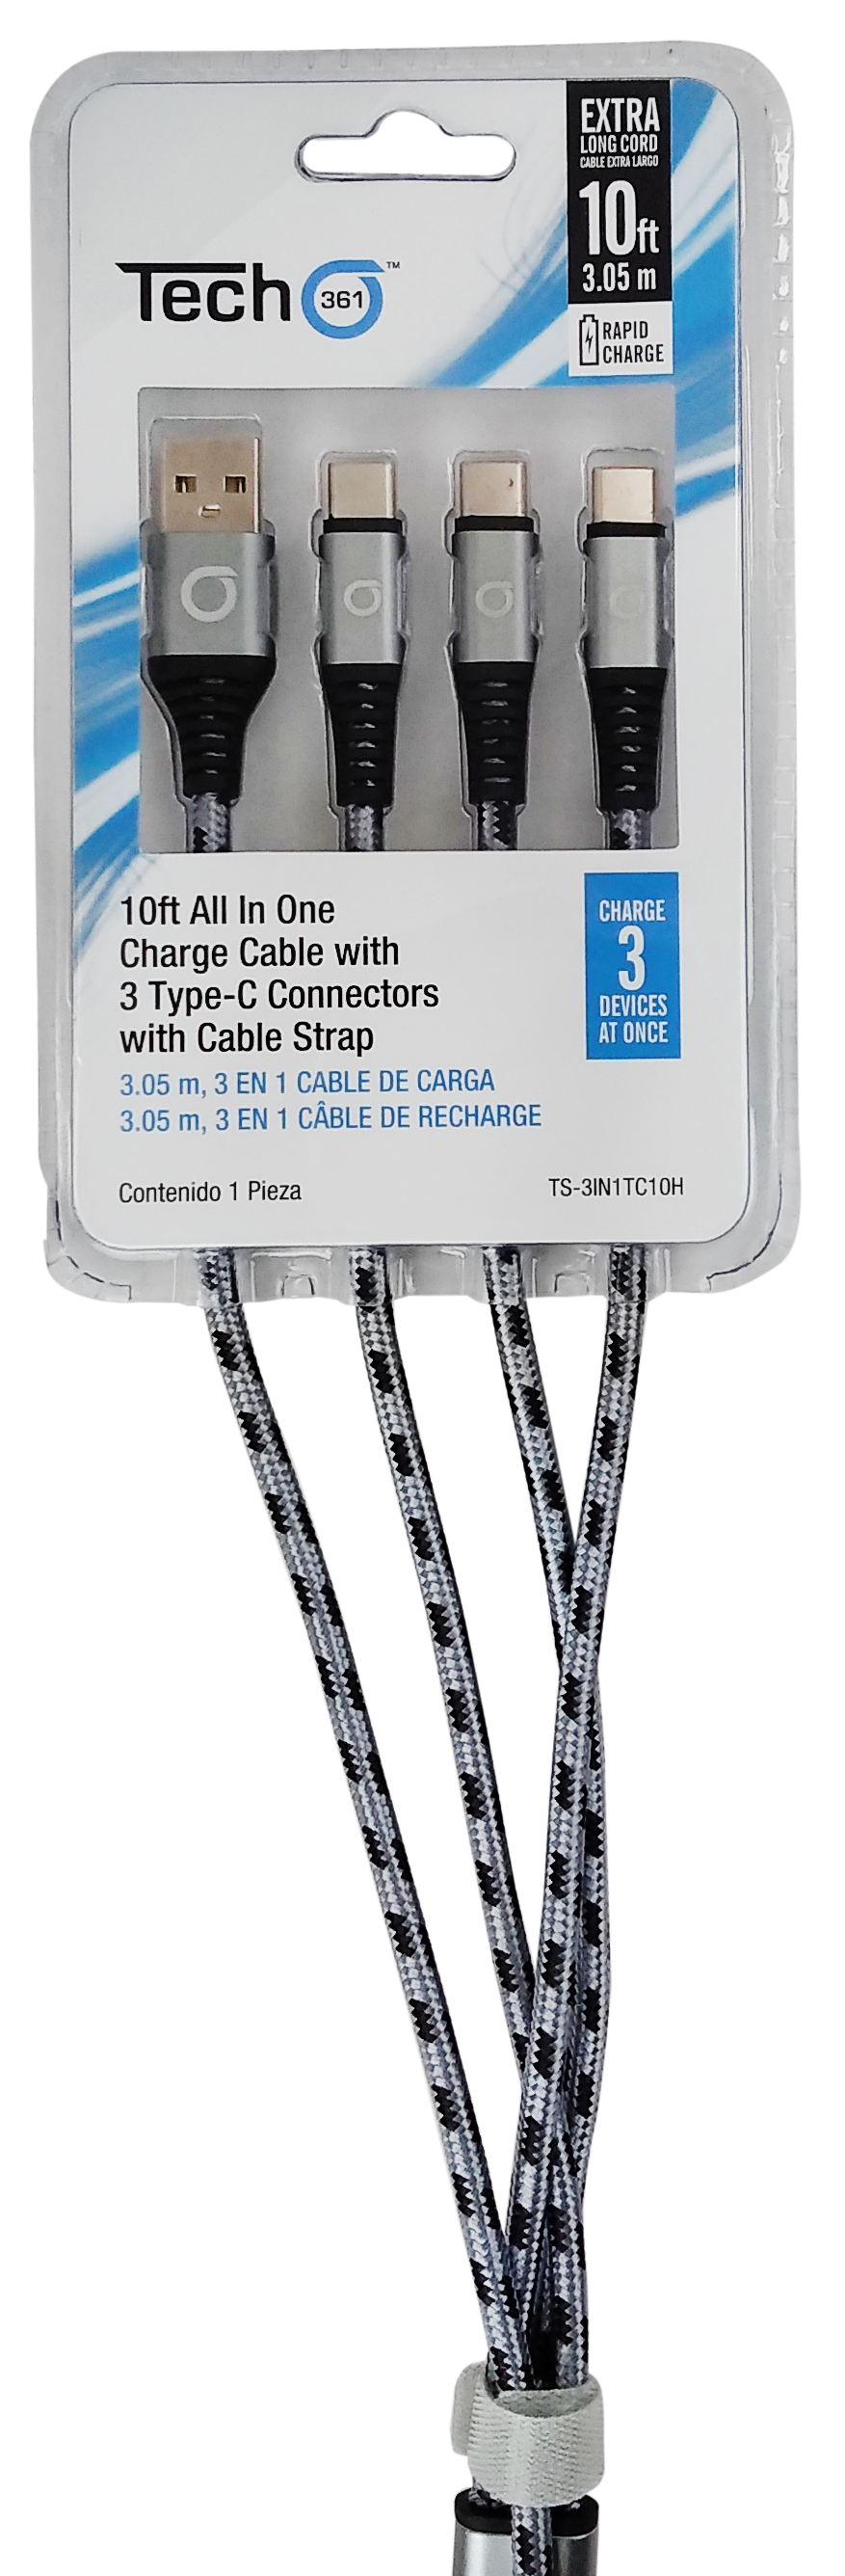 ALL IN ONE 10FT HANGING CHARGE CABLE WITH 3 TYPE-C